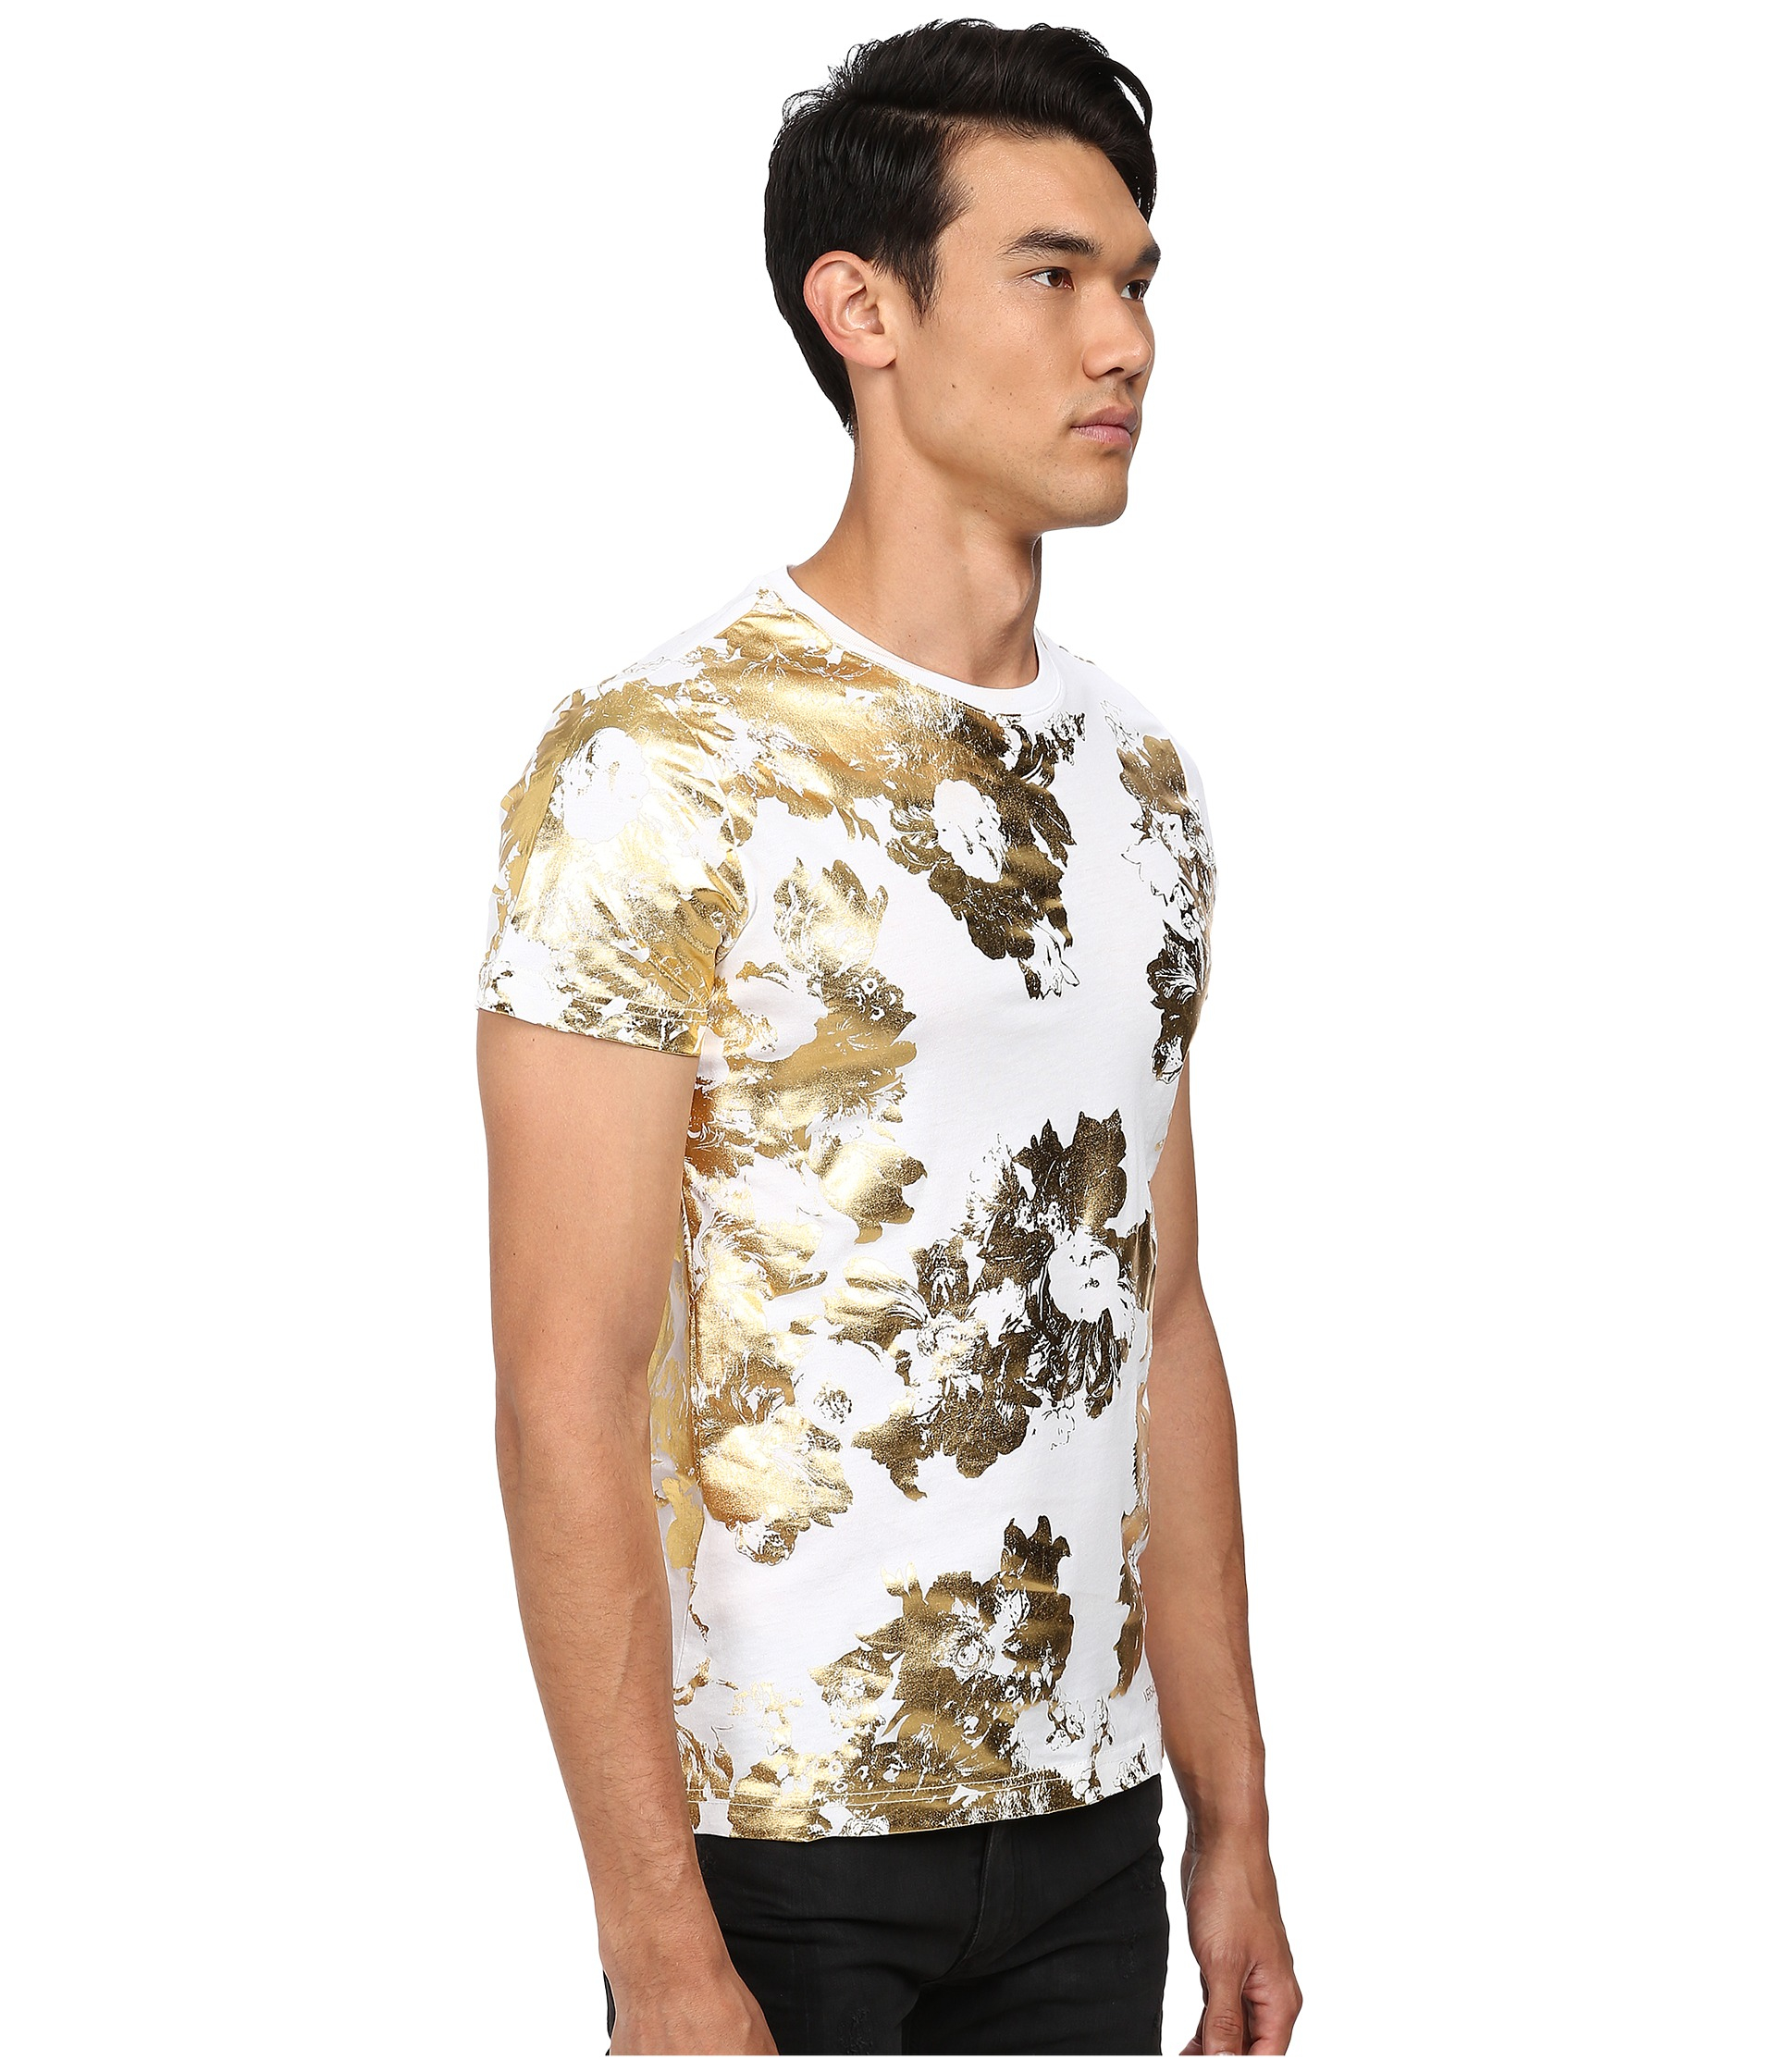 Lyst - Versace jeans Short Sleeve T-shirt With Gold Foil in White for Men